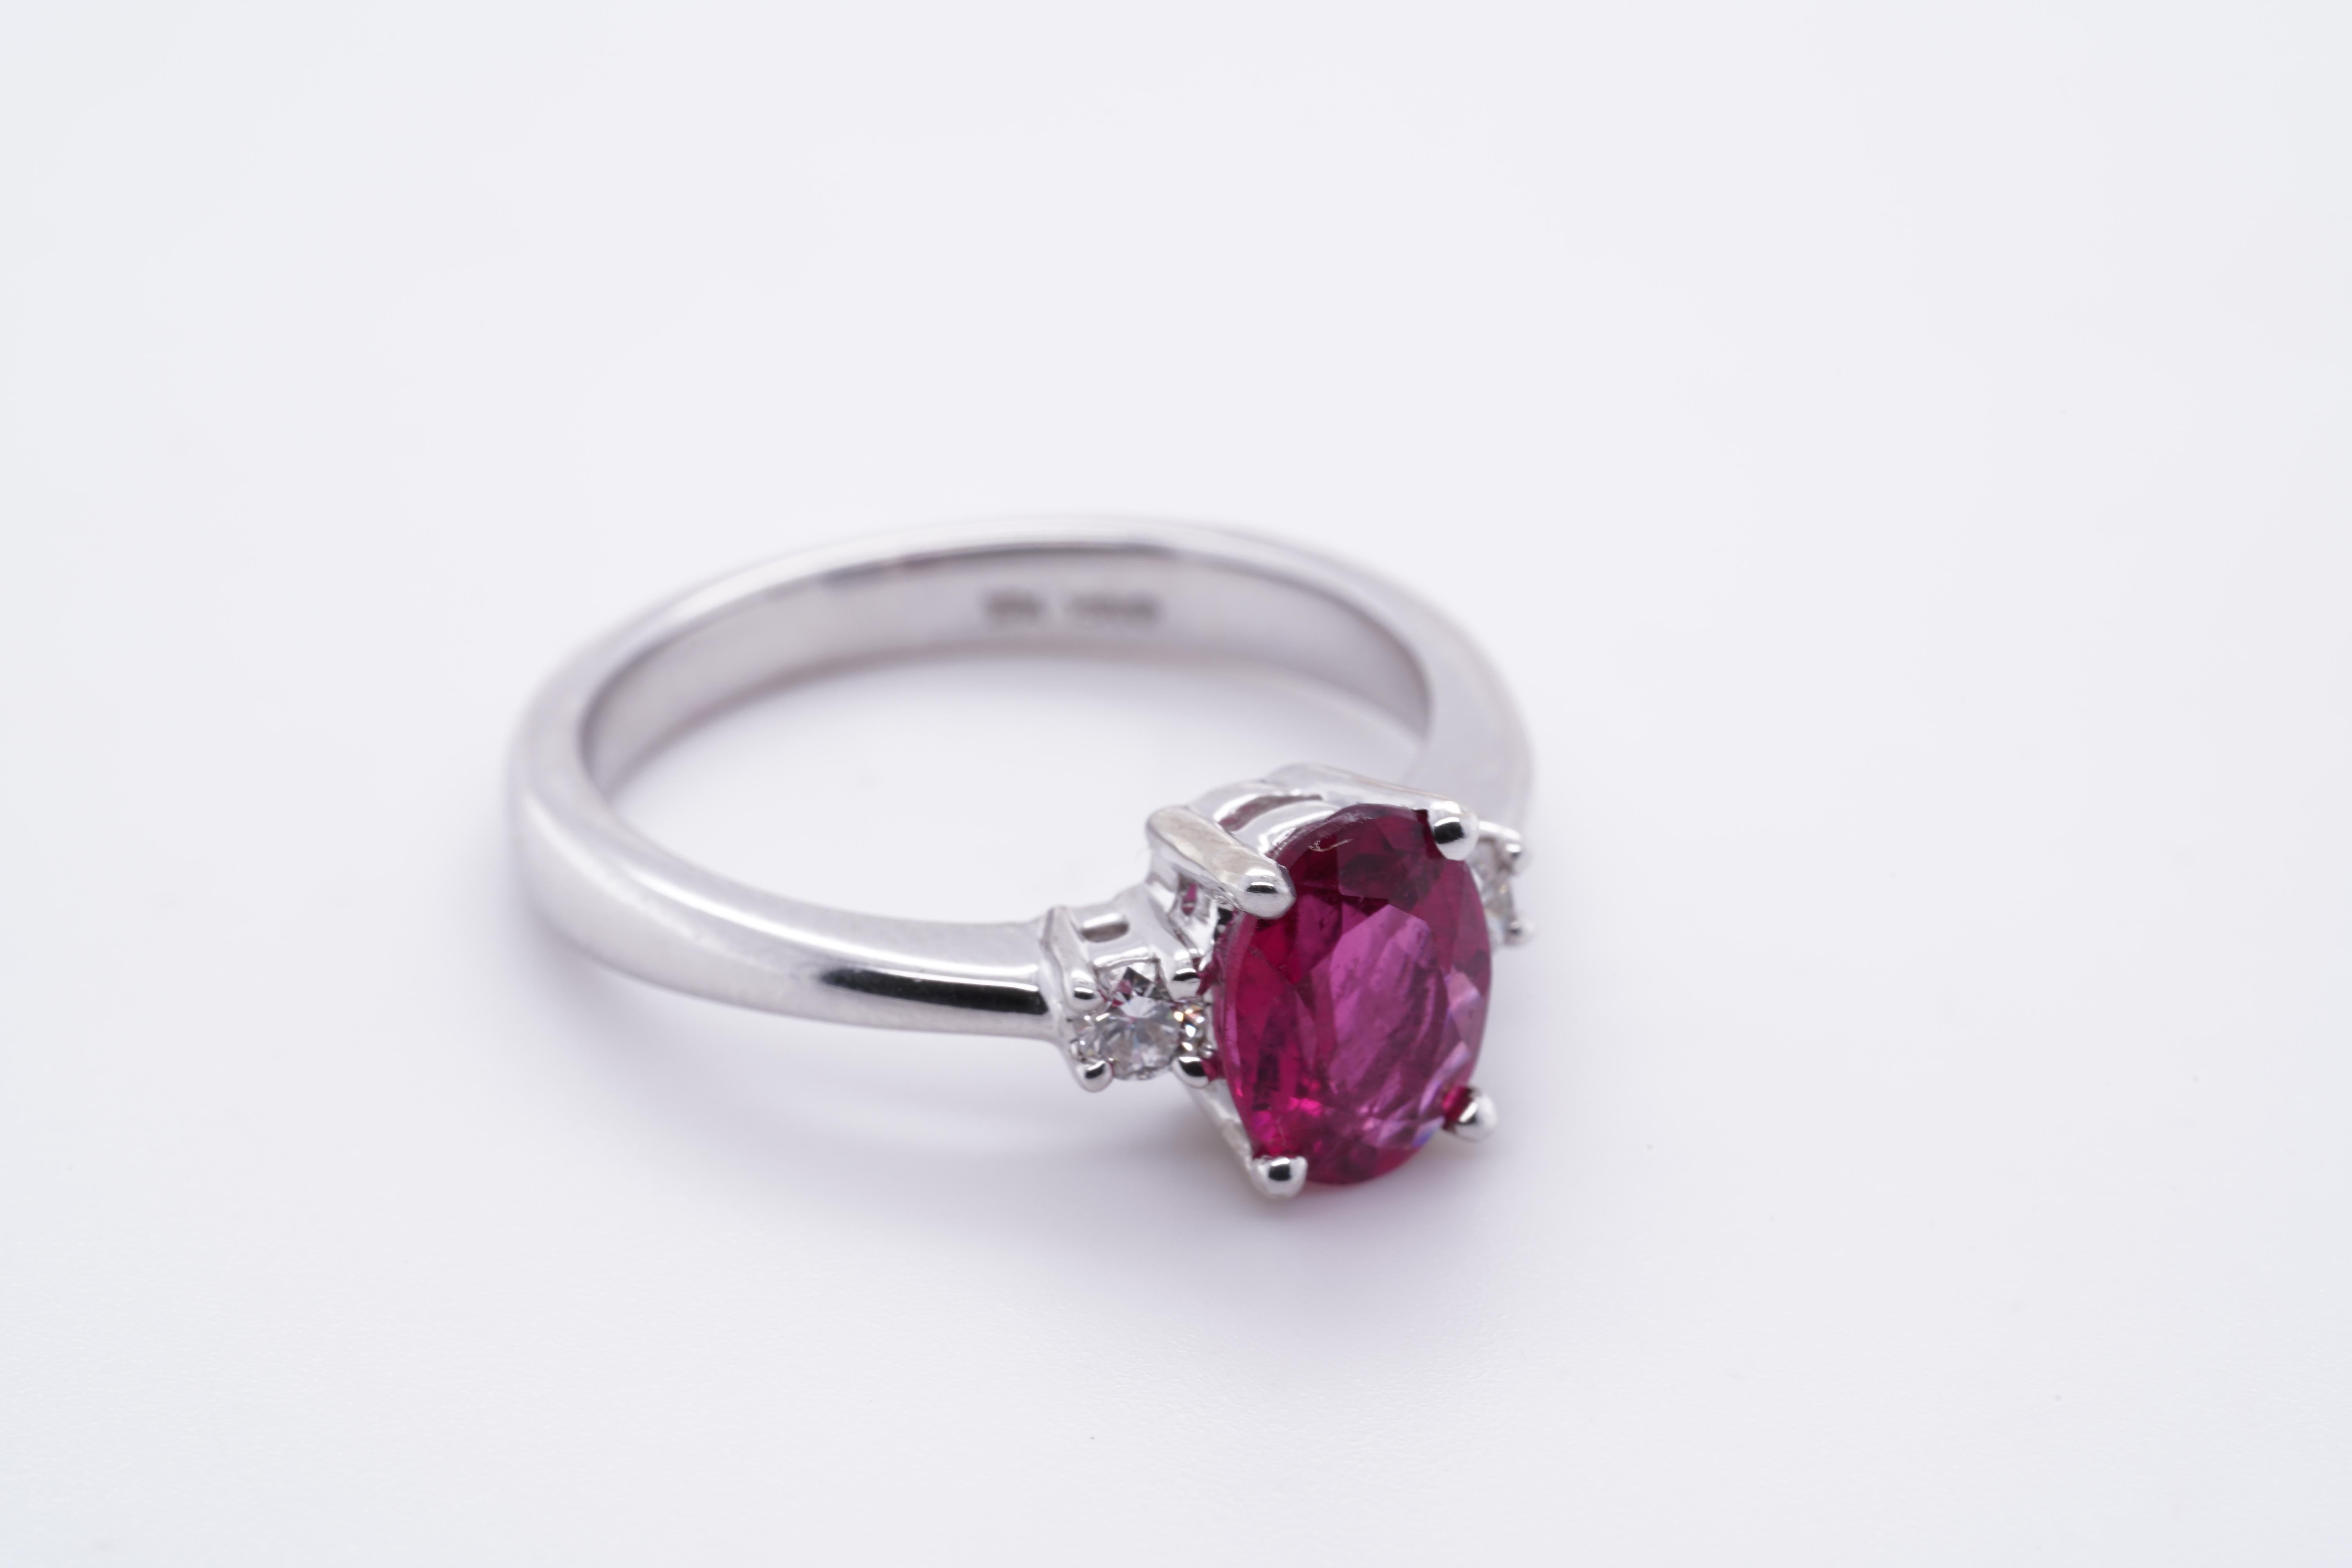 Bright, Pink, Oval Tourmaline Engagement Ring with Diamonds, 14K White Gold 7